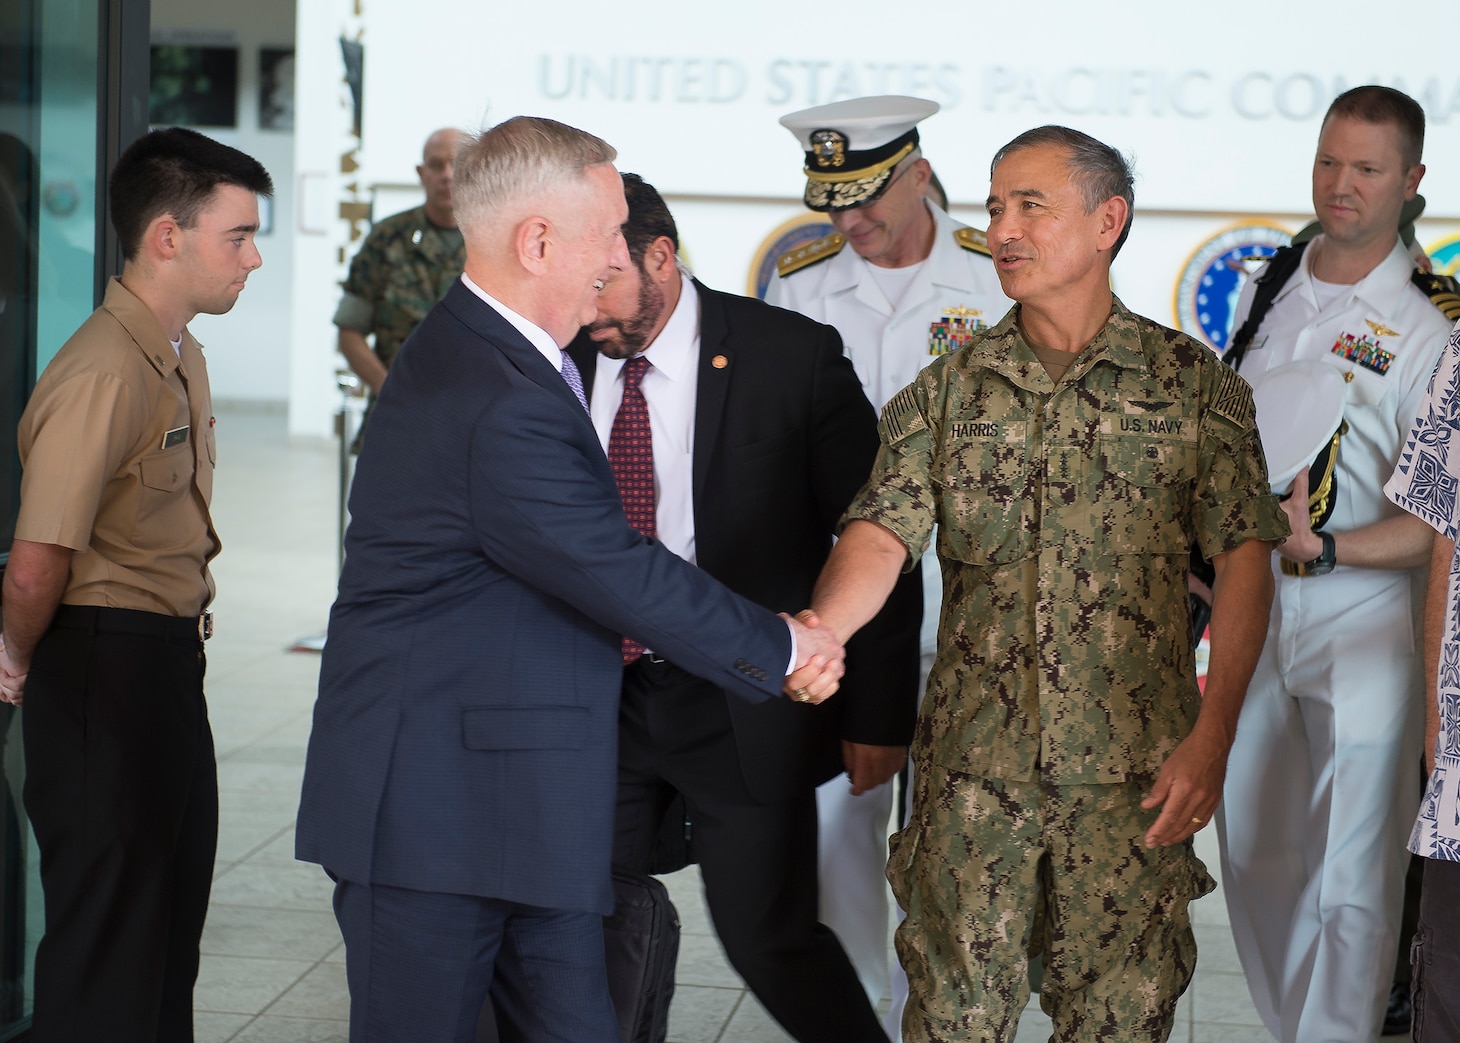 Secretary of Defense James Mattis shakes hands with Pacific Command (USPACOM) commander Adm. Harry Harris as he departs USPACOM headquarters, on the stop of an overseas trip, May 31, 2017. This is the first time Mattis has visited USPACOM headquarters since holding office as Secretary of Defense. During the meeting Mattis also met with USPACOM component commanders where they discussed challenges and opportunities in the Indo-Asia-Pacific region. 